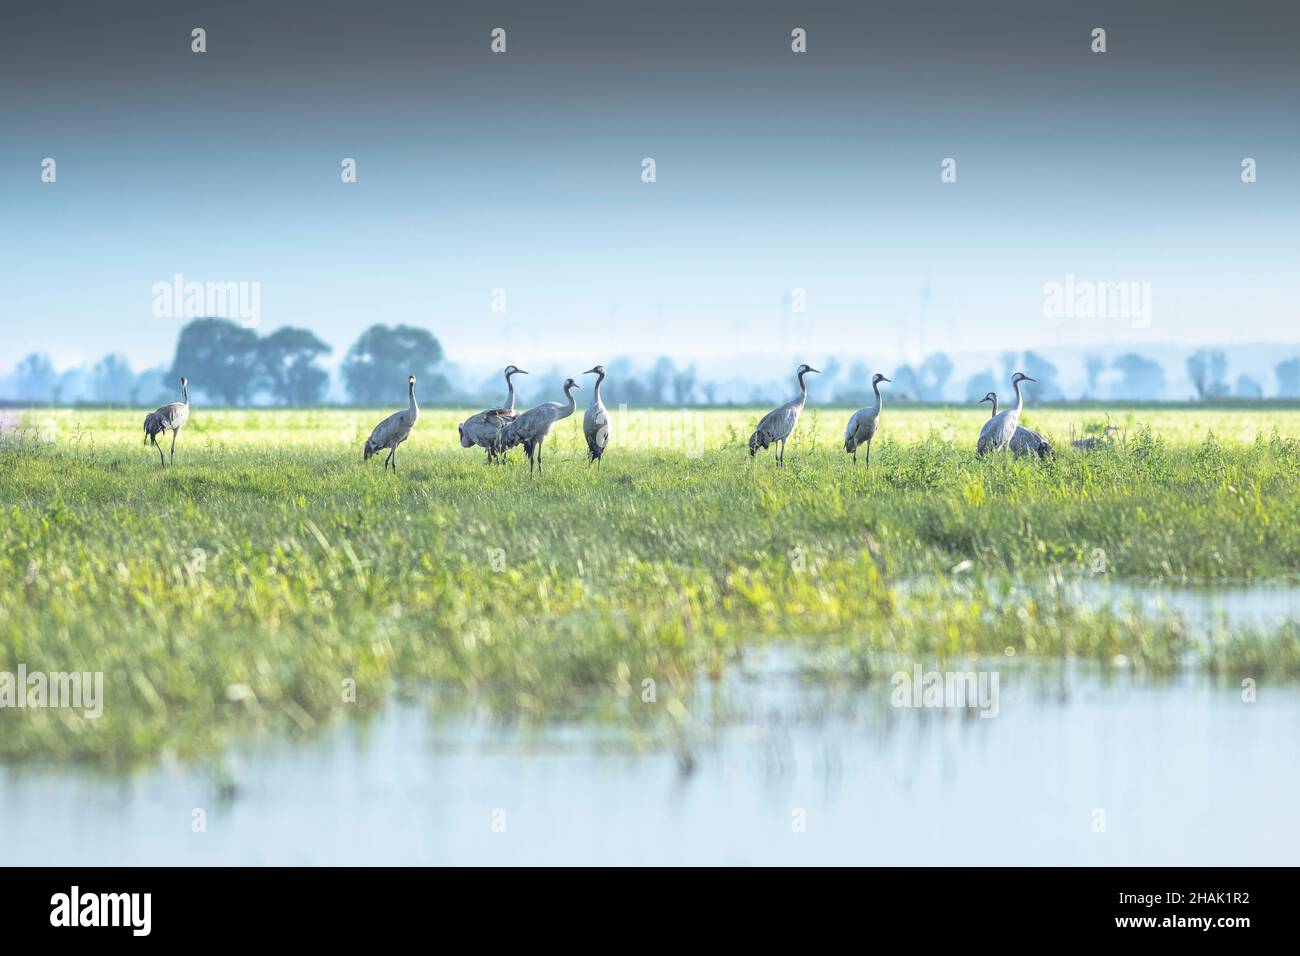 A flock of Eurasian cranes (Grus grus) standing in the wetlands Stock Photo